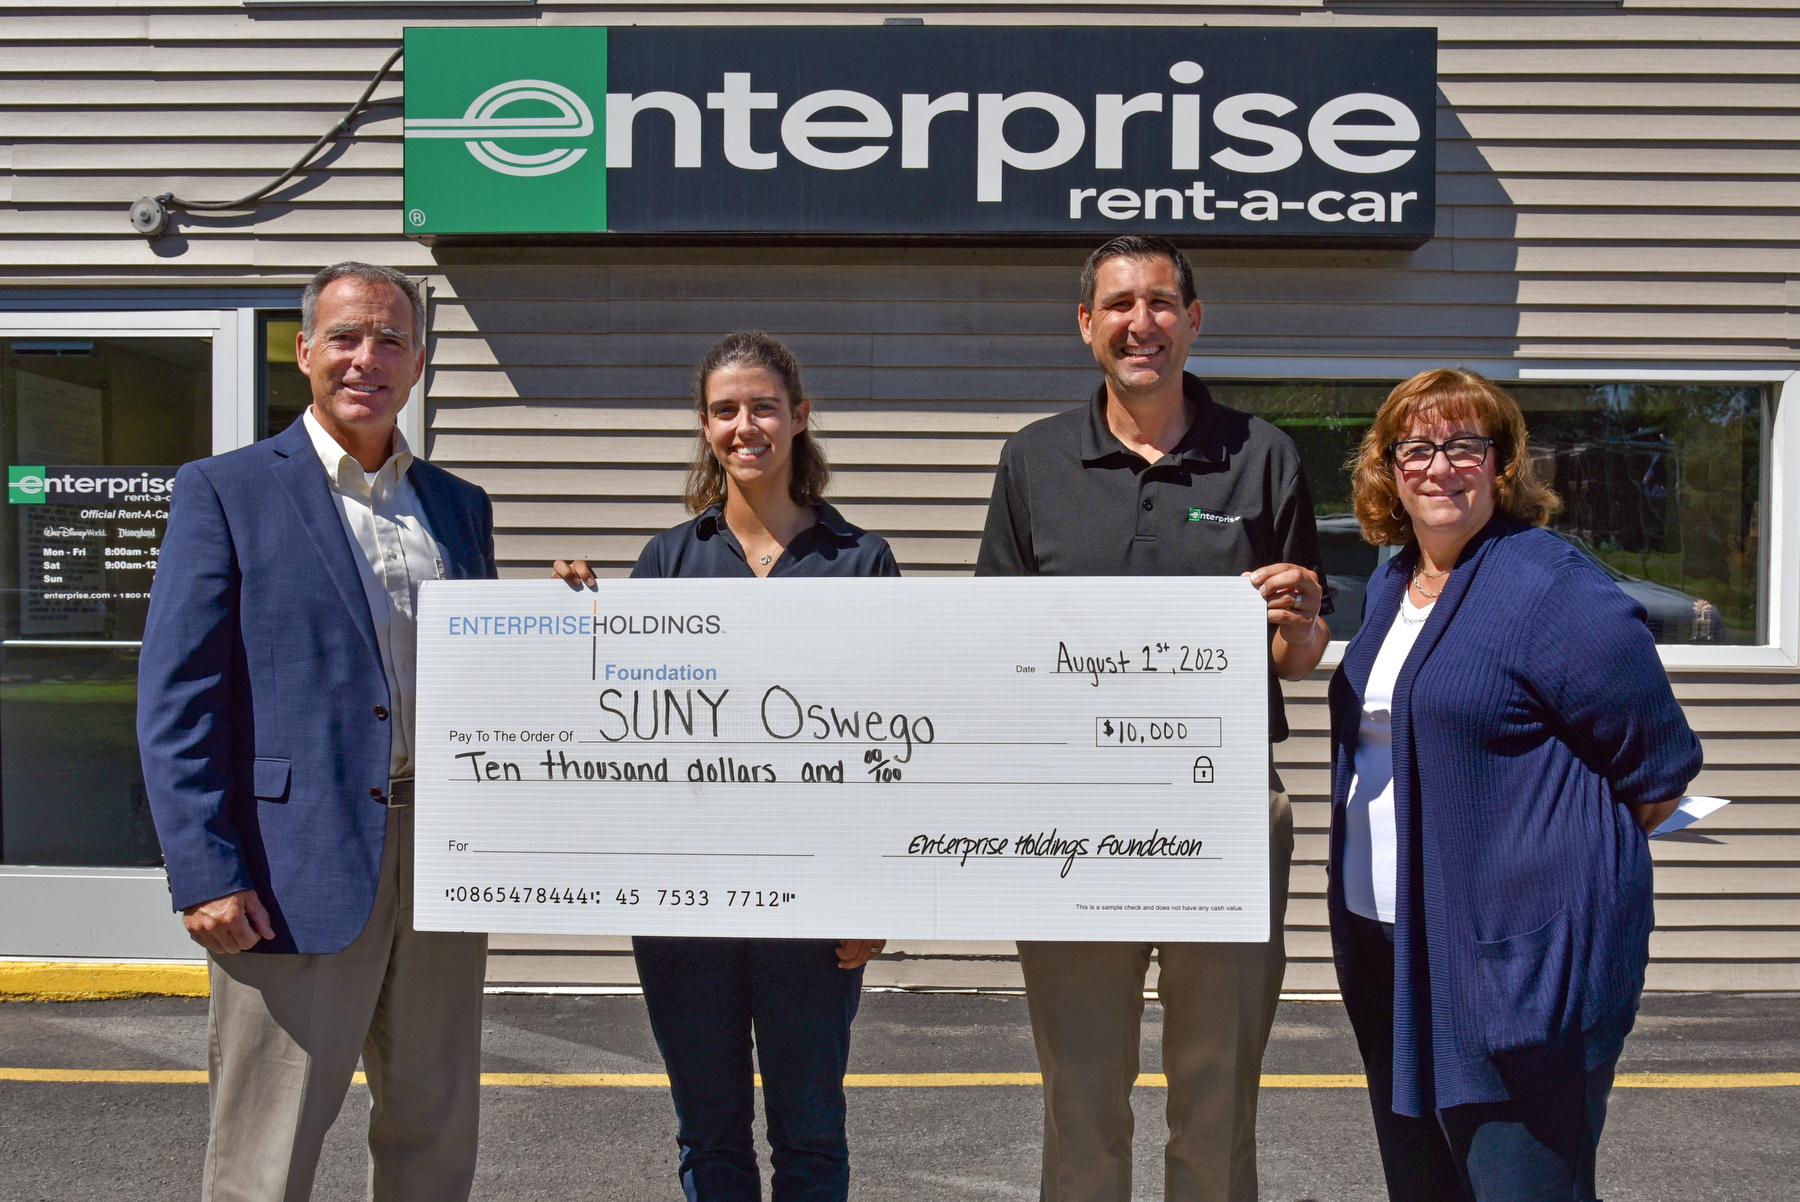 Enterprise Holdings Foundation presented a gift of $10,000 to SUNY Oswego Career Services. Zoe Arnell (second from left), Oswego branch manager of Enterprise Holdings, and Jody Giarrusso (third from left), talent acquisition manager of Enterprise Human Resources, present the check to Gary Morris (left), from the Office of Career Services, and Jennifer Hill, executive director of career services, corporate and foundation relations at SUNY Oswego.